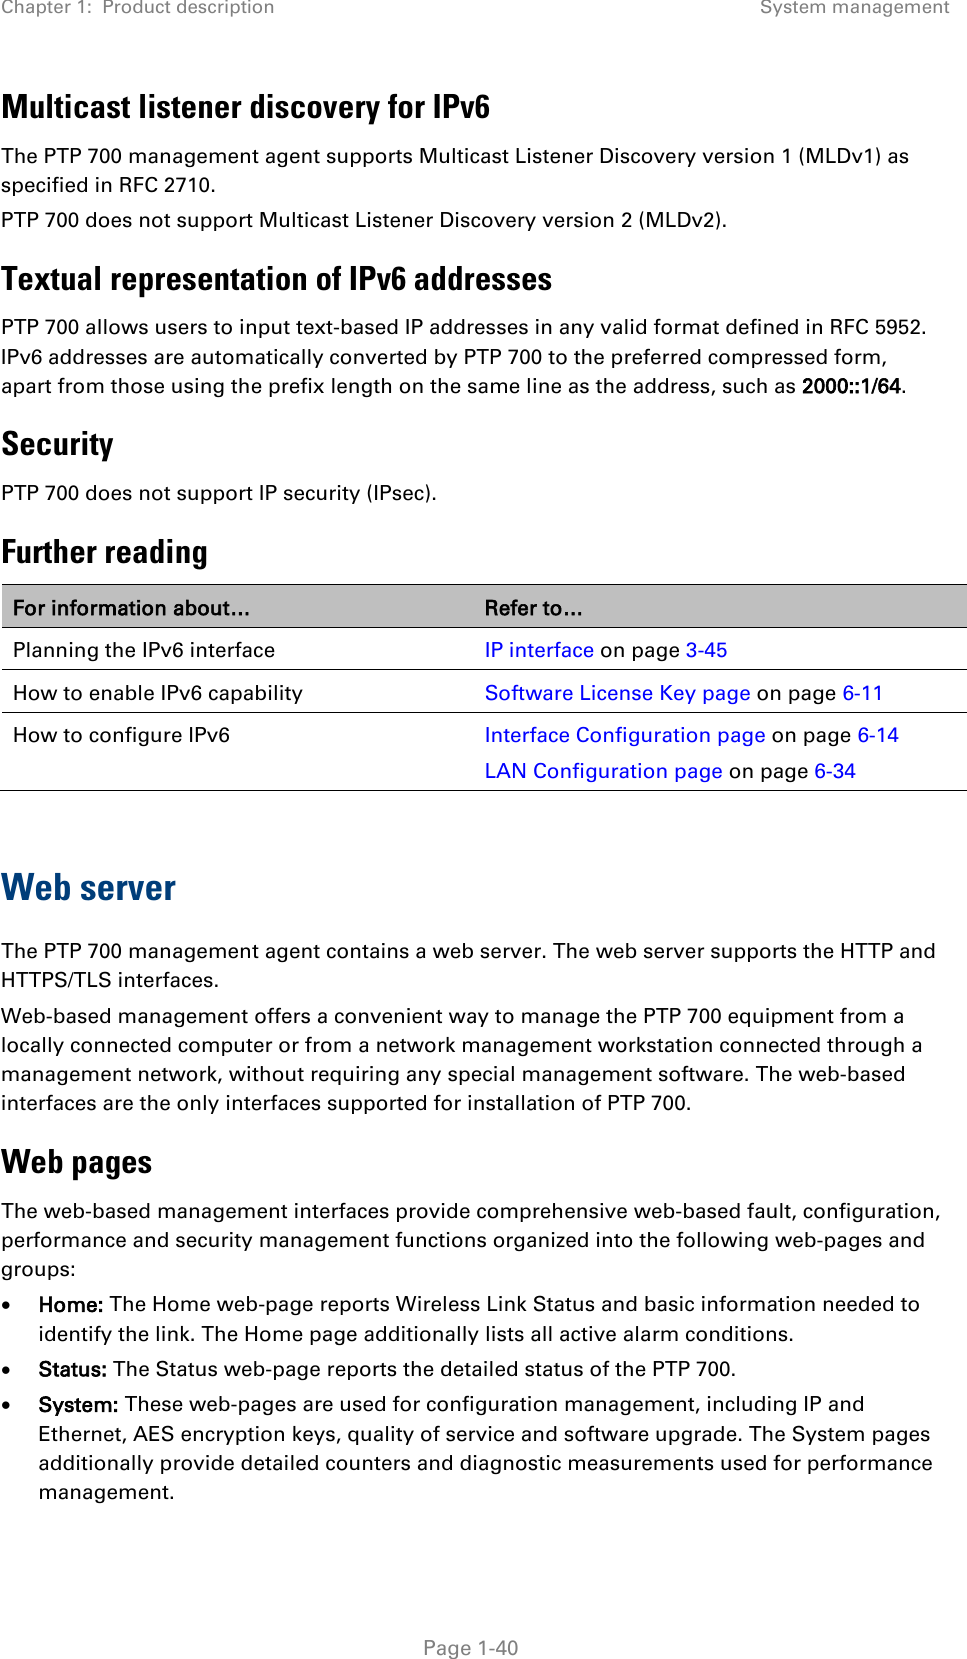 Chapter 1:  Product description System management  Multicast listener discovery for IPv6 The PTP 700 management agent supports Multicast Listener Discovery version 1 (MLDv1) as specified in RFC 2710. PTP 700 does not support Multicast Listener Discovery version 2 (MLDv2). Textual representation of IPv6 addresses PTP 700 allows users to input text-based IP addresses in any valid format defined in RFC 5952. IPv6 addresses are automatically converted by PTP 700 to the preferred compressed form, apart from those using the prefix length on the same line as the address, such as 2000::1/64. Security PTP 700 does not support IP security (IPsec). Further reading For information about… Refer to… Planning the IPv6 interface IP interface on page 3-45 How to enable IPv6 capability Software License Key page on page 6-11 How to configure IPv6 Interface Configuration page on page 6-14 LAN Configuration page on page 6-34  Web server The PTP 700 management agent contains a web server. The web server supports the HTTP and HTTPS/TLS interfaces. Web-based management offers a convenient way to manage the PTP 700 equipment from a locally connected computer or from a network management workstation connected through a management network, without requiring any special management software. The web-based interfaces are the only interfaces supported for installation of PTP 700. Web pages The web-based management interfaces provide comprehensive web-based fault, configuration, performance and security management functions organized into the following web-pages and groups: • Home: The Home web-page reports Wireless Link Status and basic information needed to identify the link. The Home page additionally lists all active alarm conditions. • Status: The Status web-page reports the detailed status of the PTP 700. • System: These web-pages are used for configuration management, including IP and Ethernet, AES encryption keys, quality of service and software upgrade. The System pages additionally provide detailed counters and diagnostic measurements used for performance management.  Page 1-40 